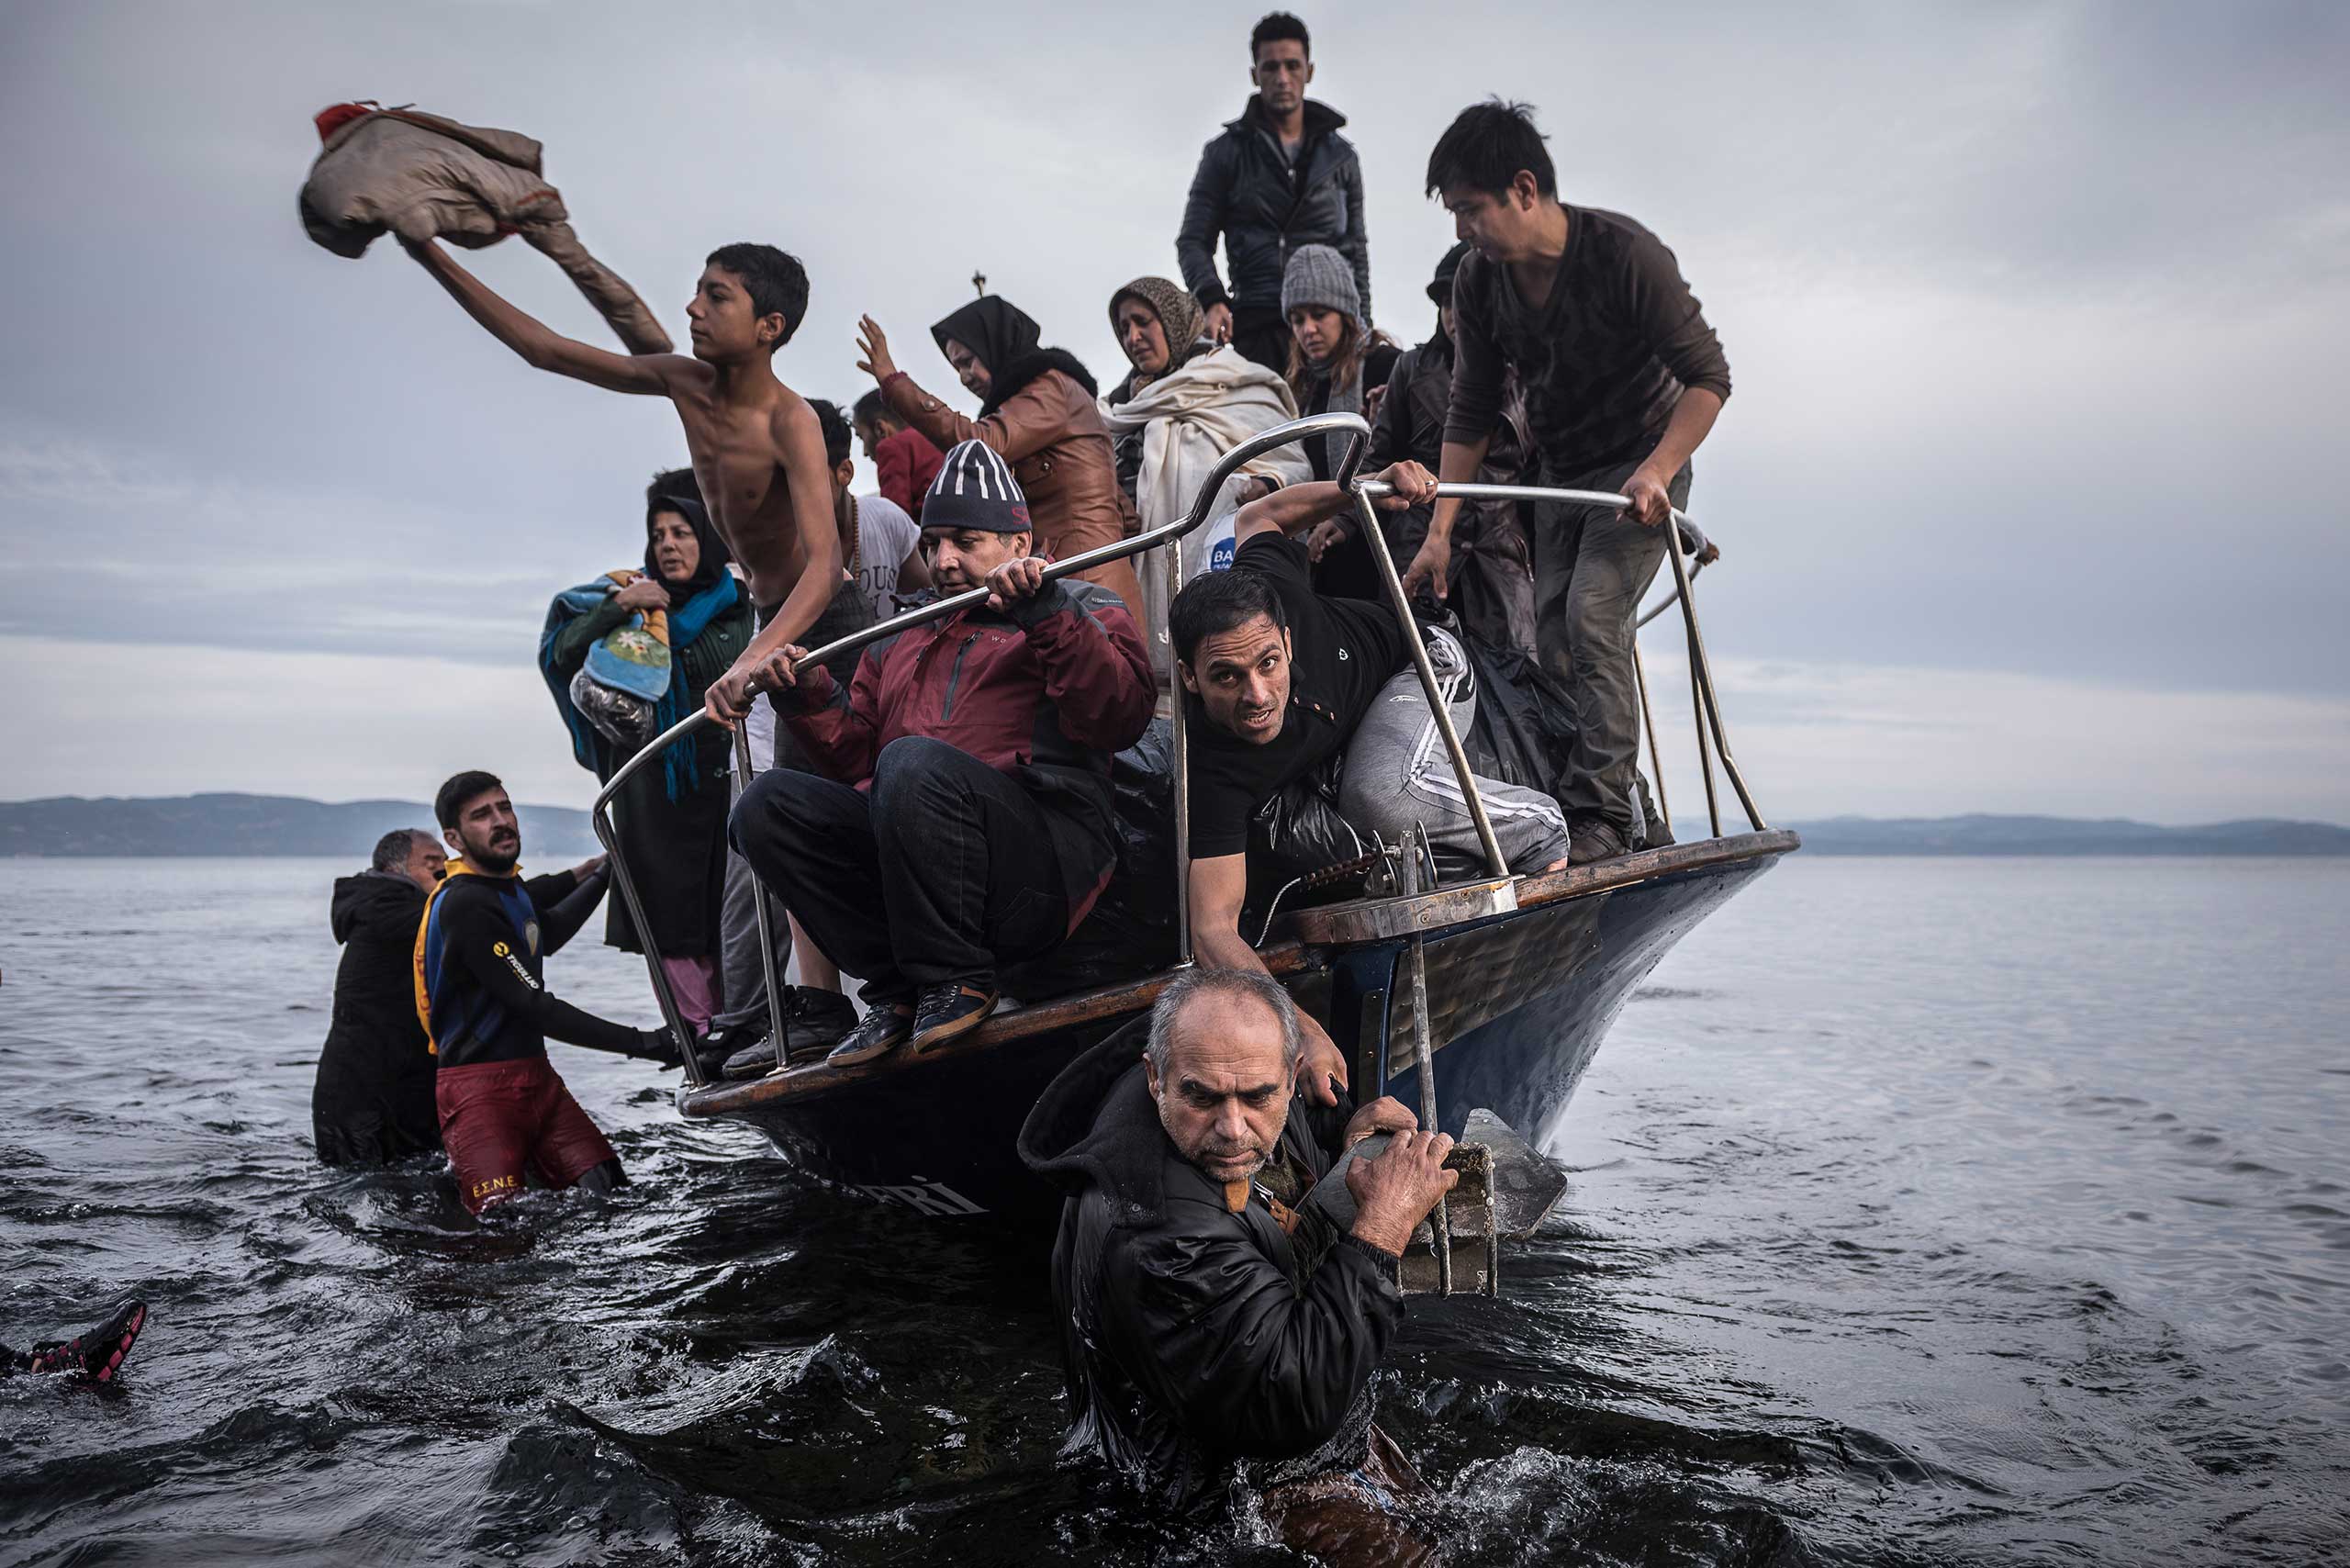 Migrants arrive by a Turkish boat near the village of Skala, on the Greek island of Lesbos. The Turkish boat owner delivered some 150 people to the Greek coast and tried to escape back to Turkey; he was arrested in Turkish waters. Nov. 16, 2015.